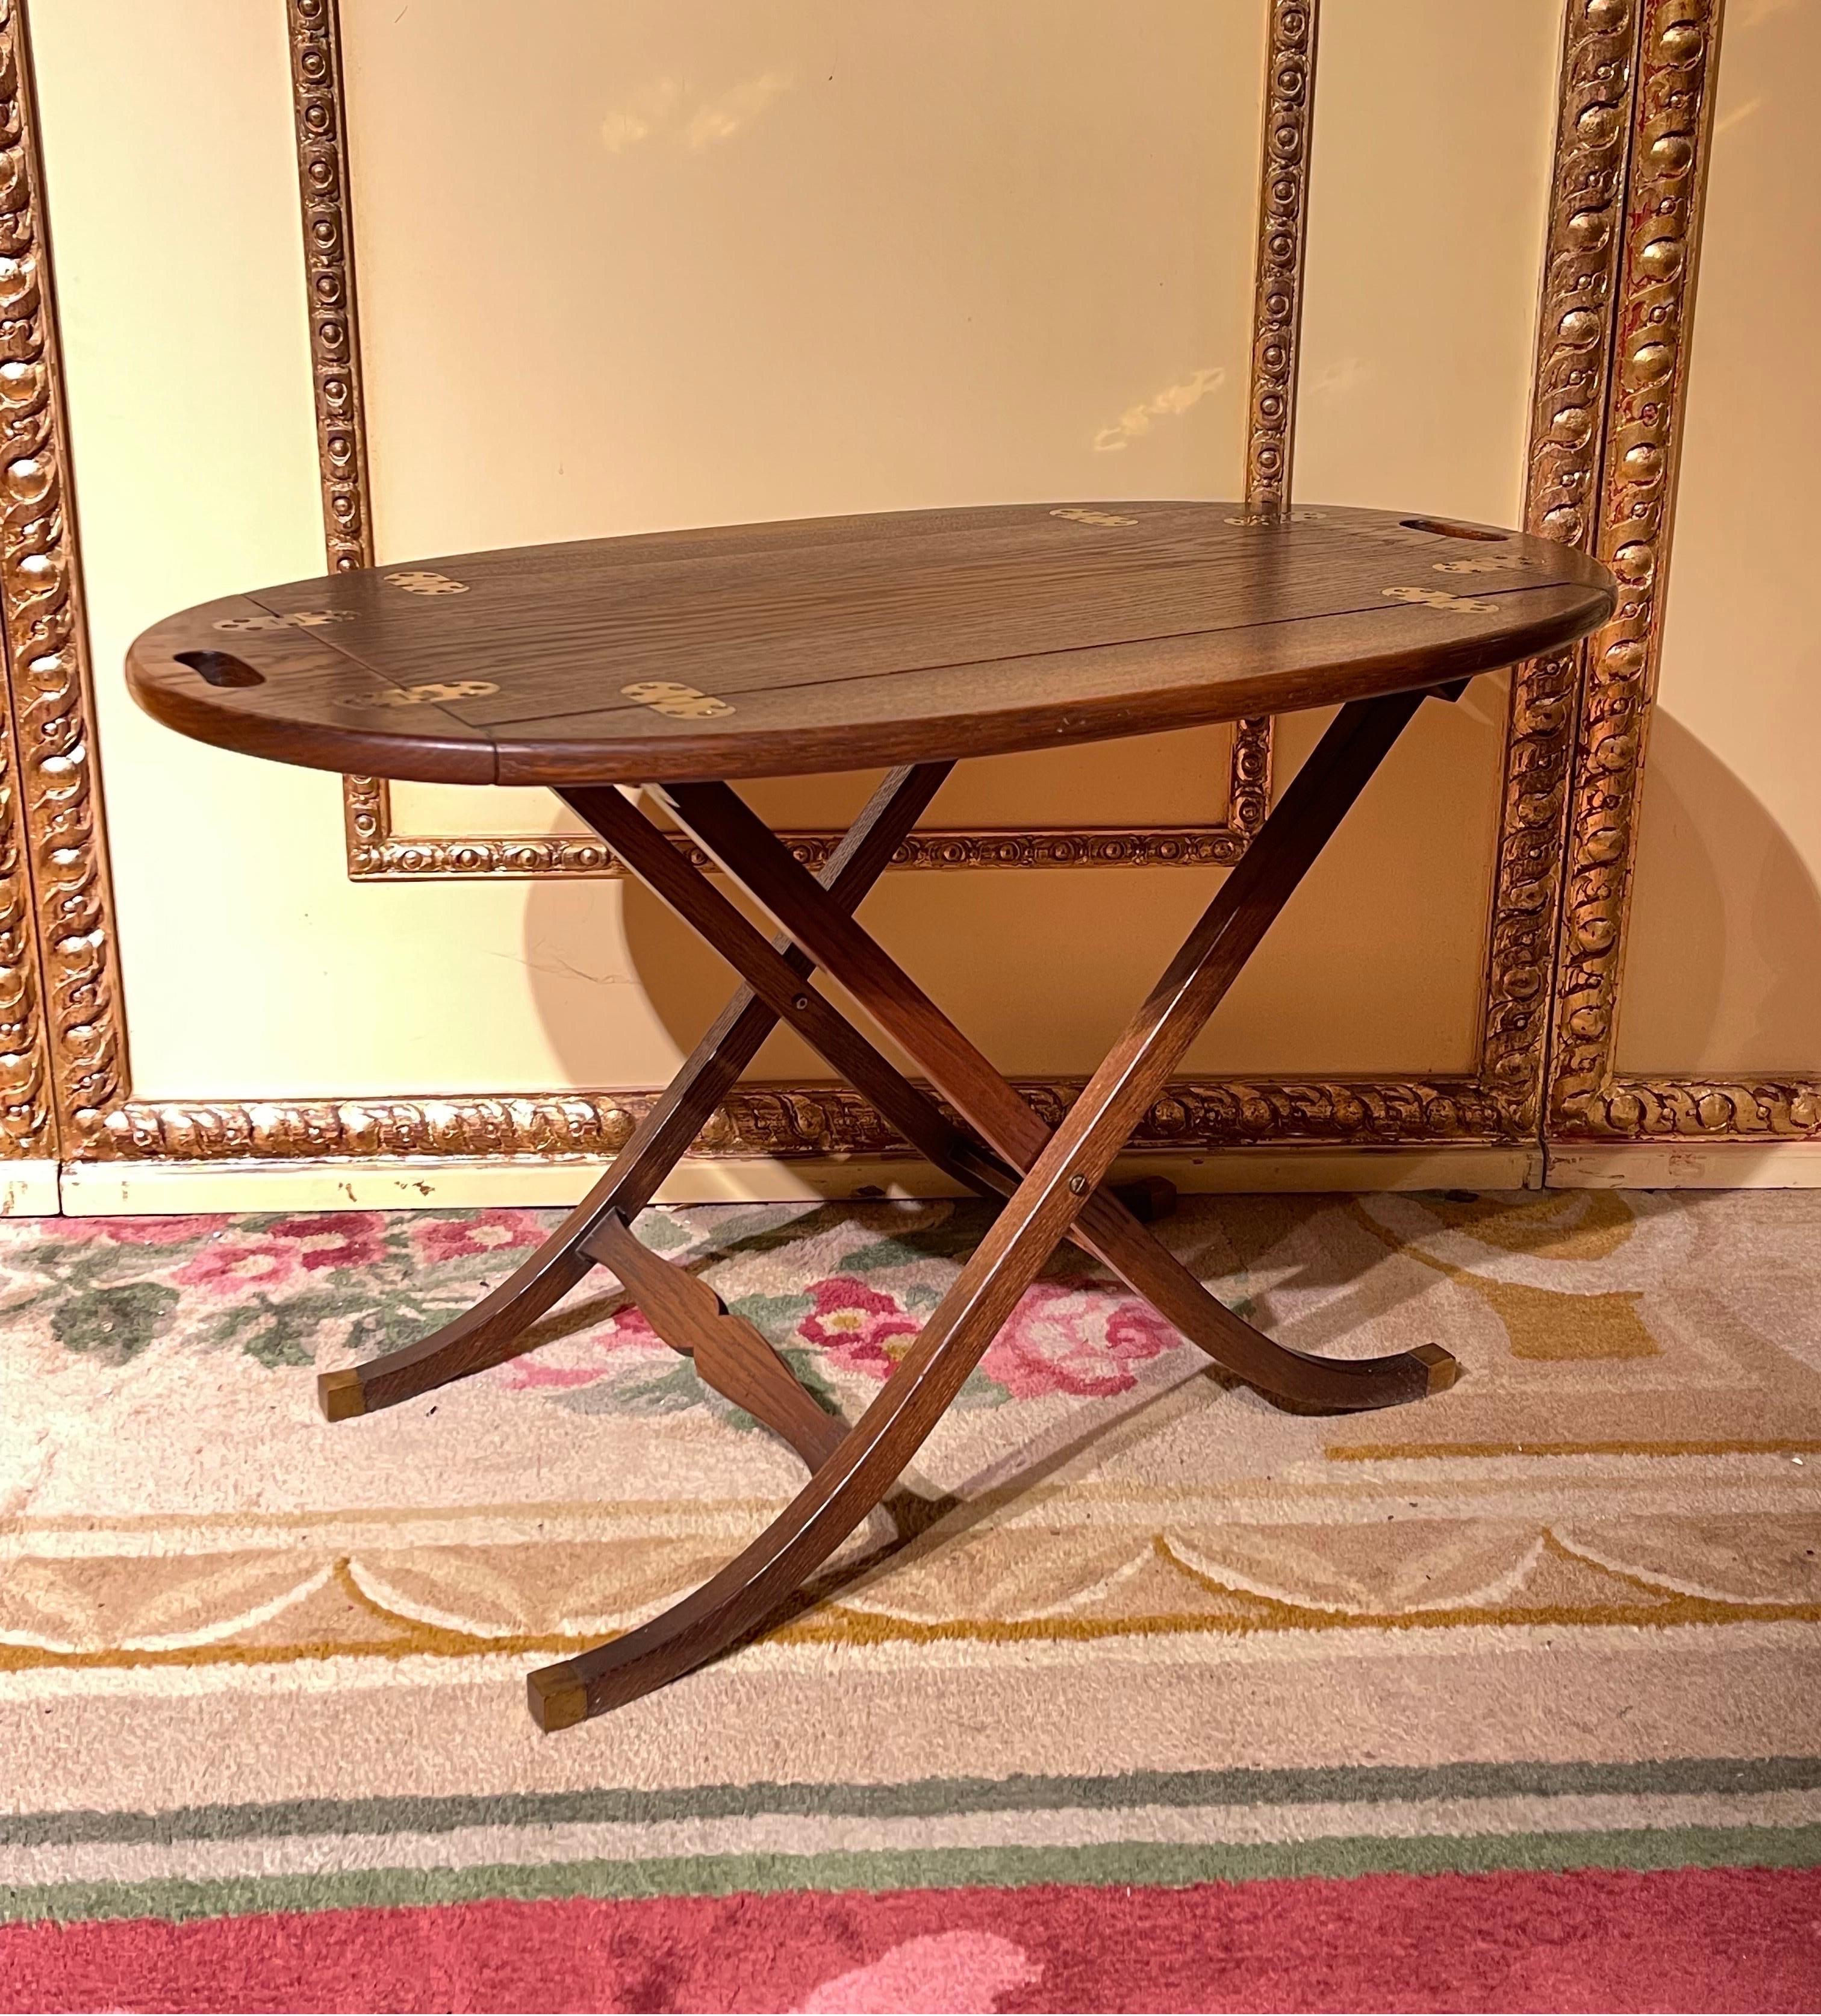 20th century English captain's coffee table / table, oak

Oak solid body. Classic captain's coffee table. Removable plate which can be used as a tray. Foldable and foldable sides with brass hinges.